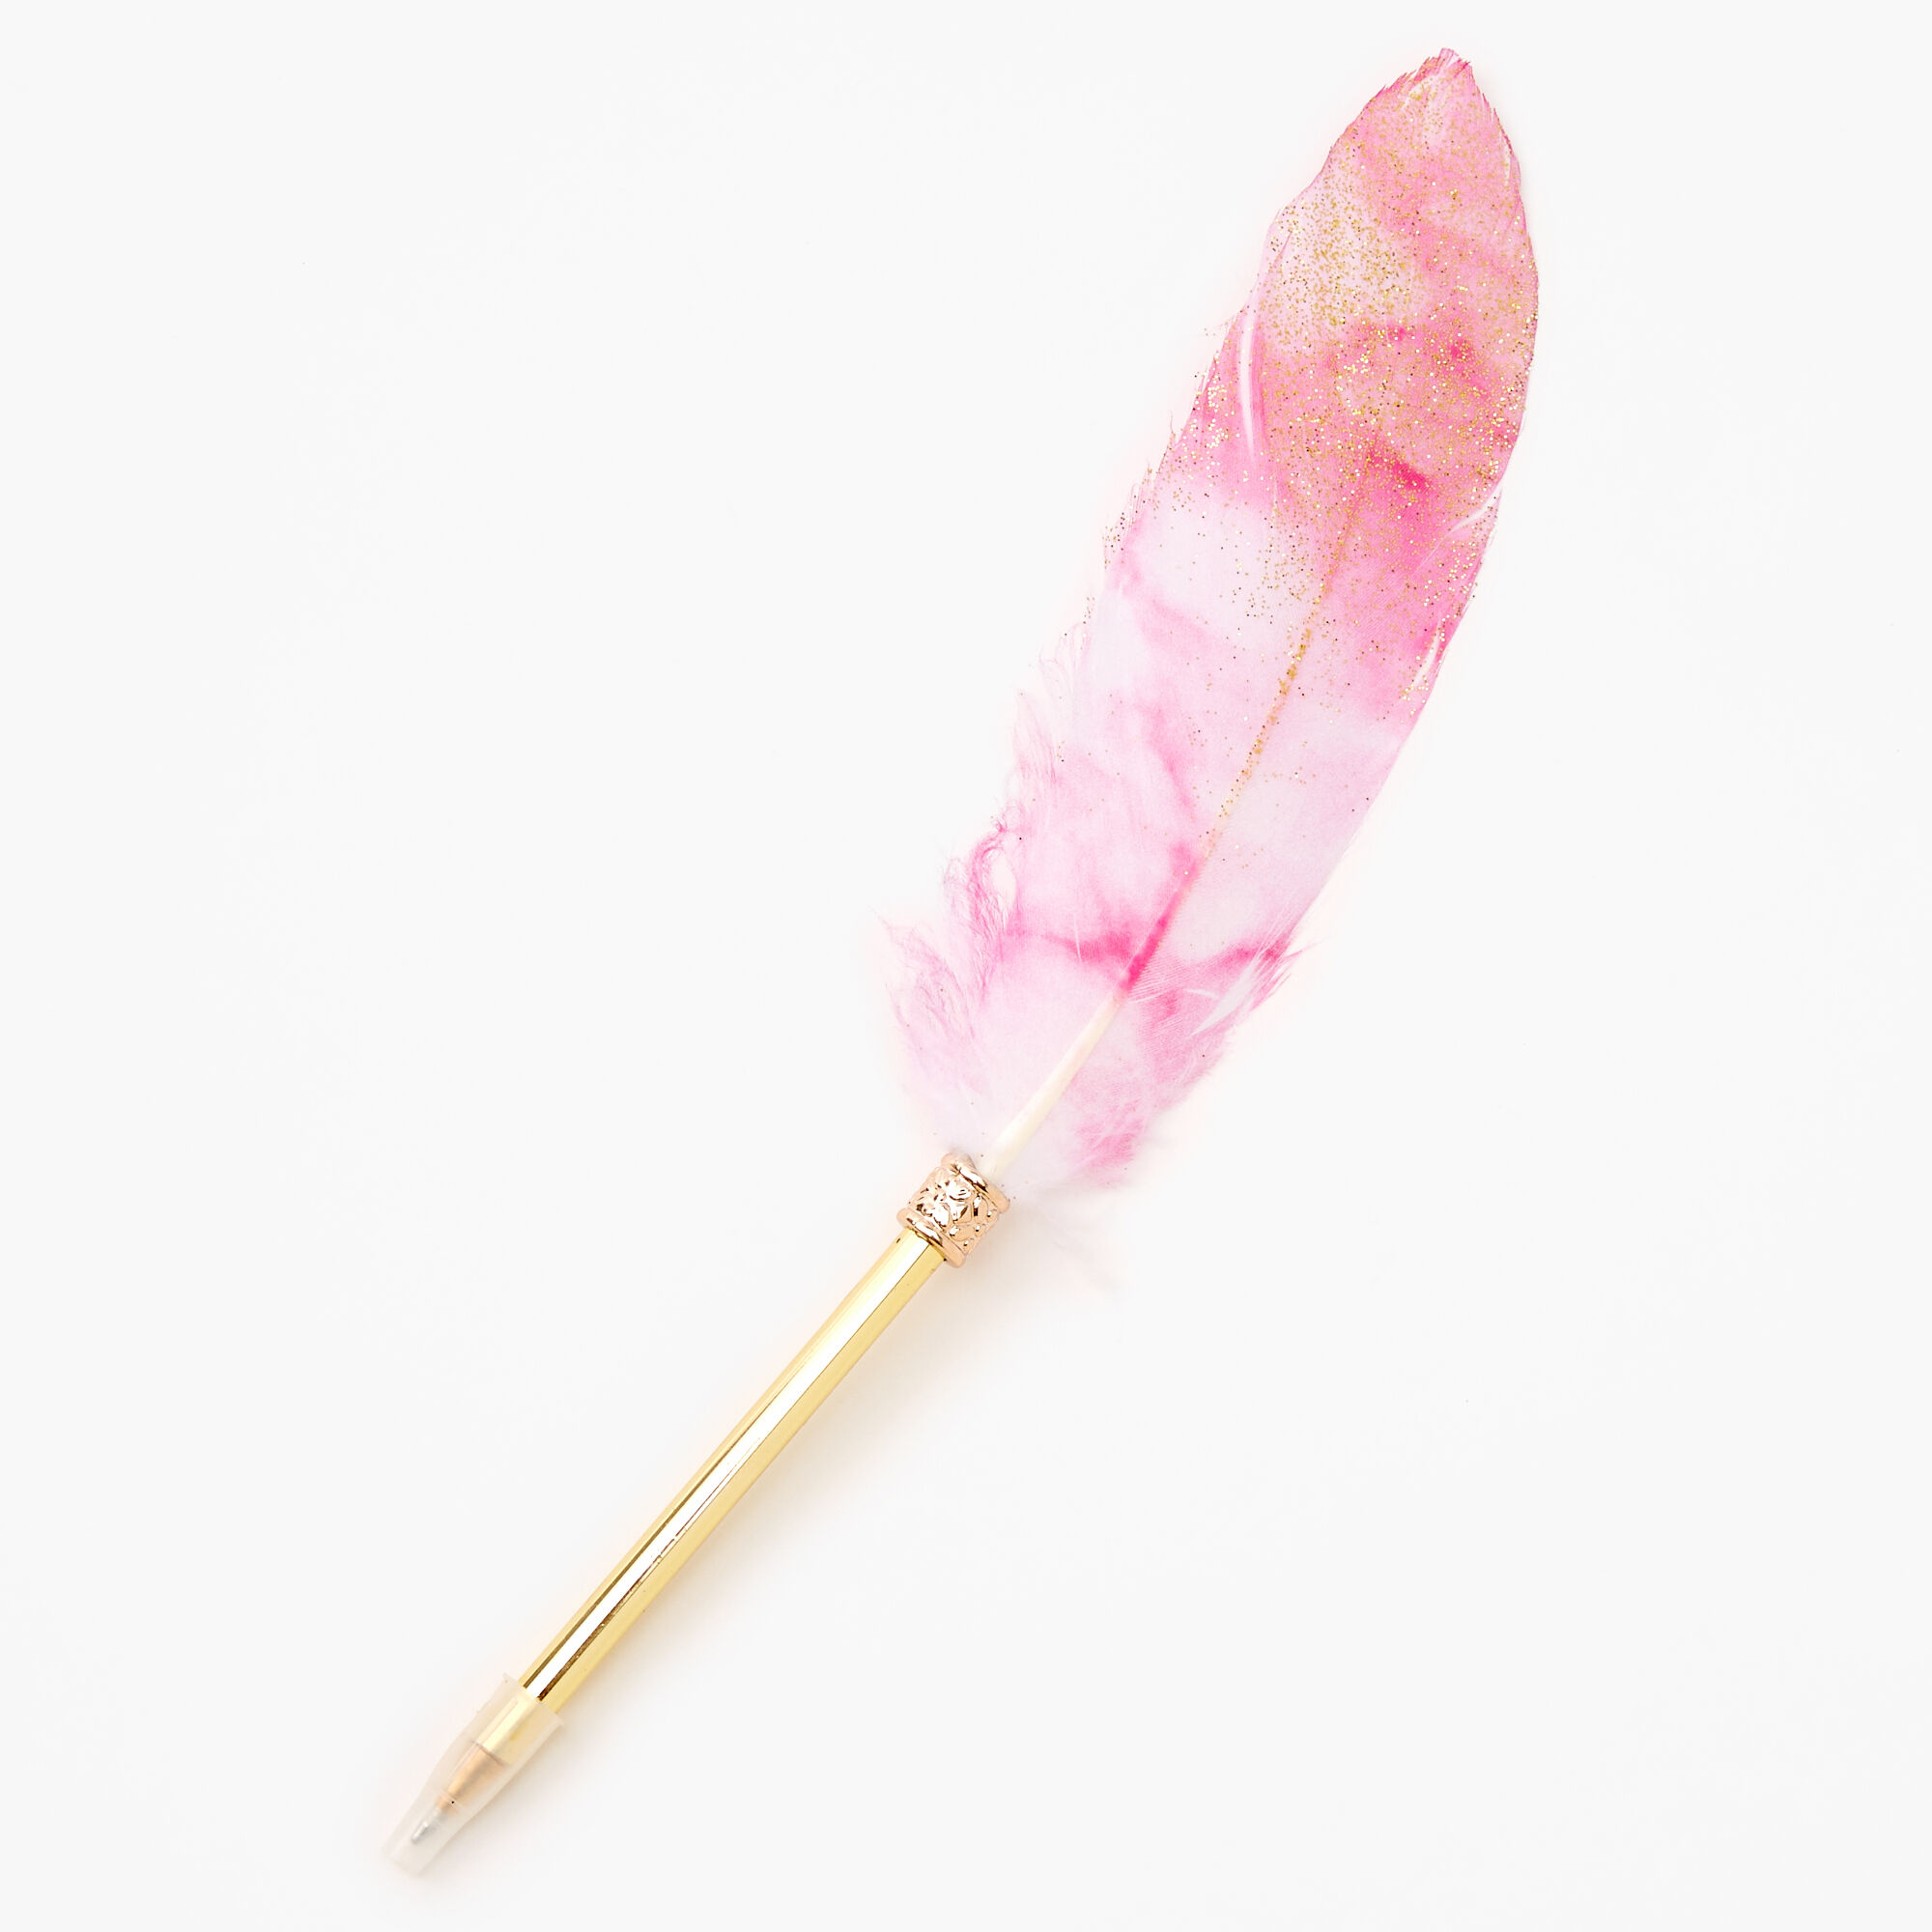 View Claires Glittery Ombre Feather Pen Pink information